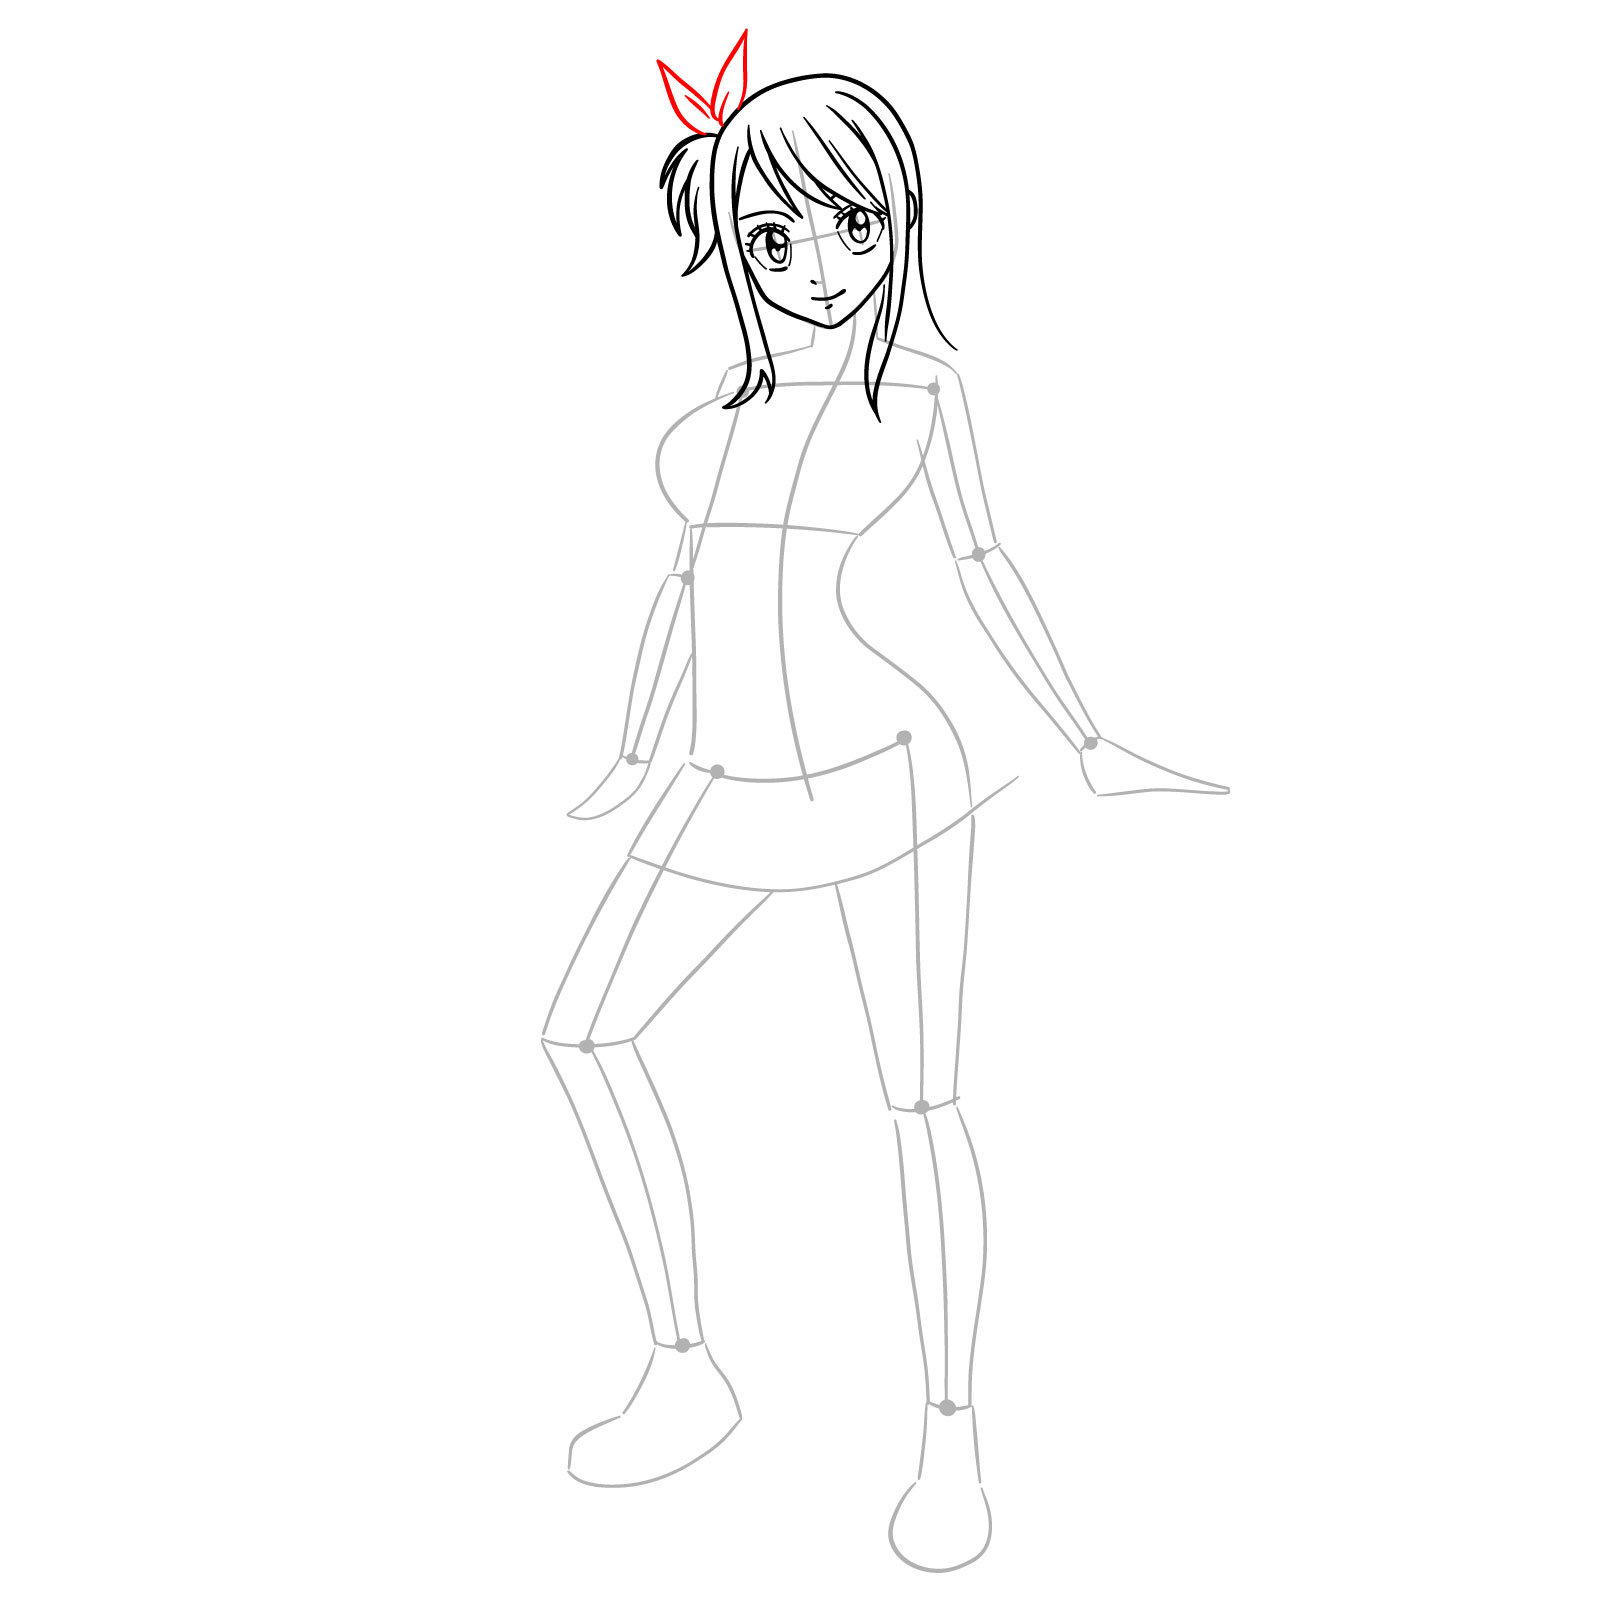 How to draw Lucy Heartfilia in a new outfit - step 12